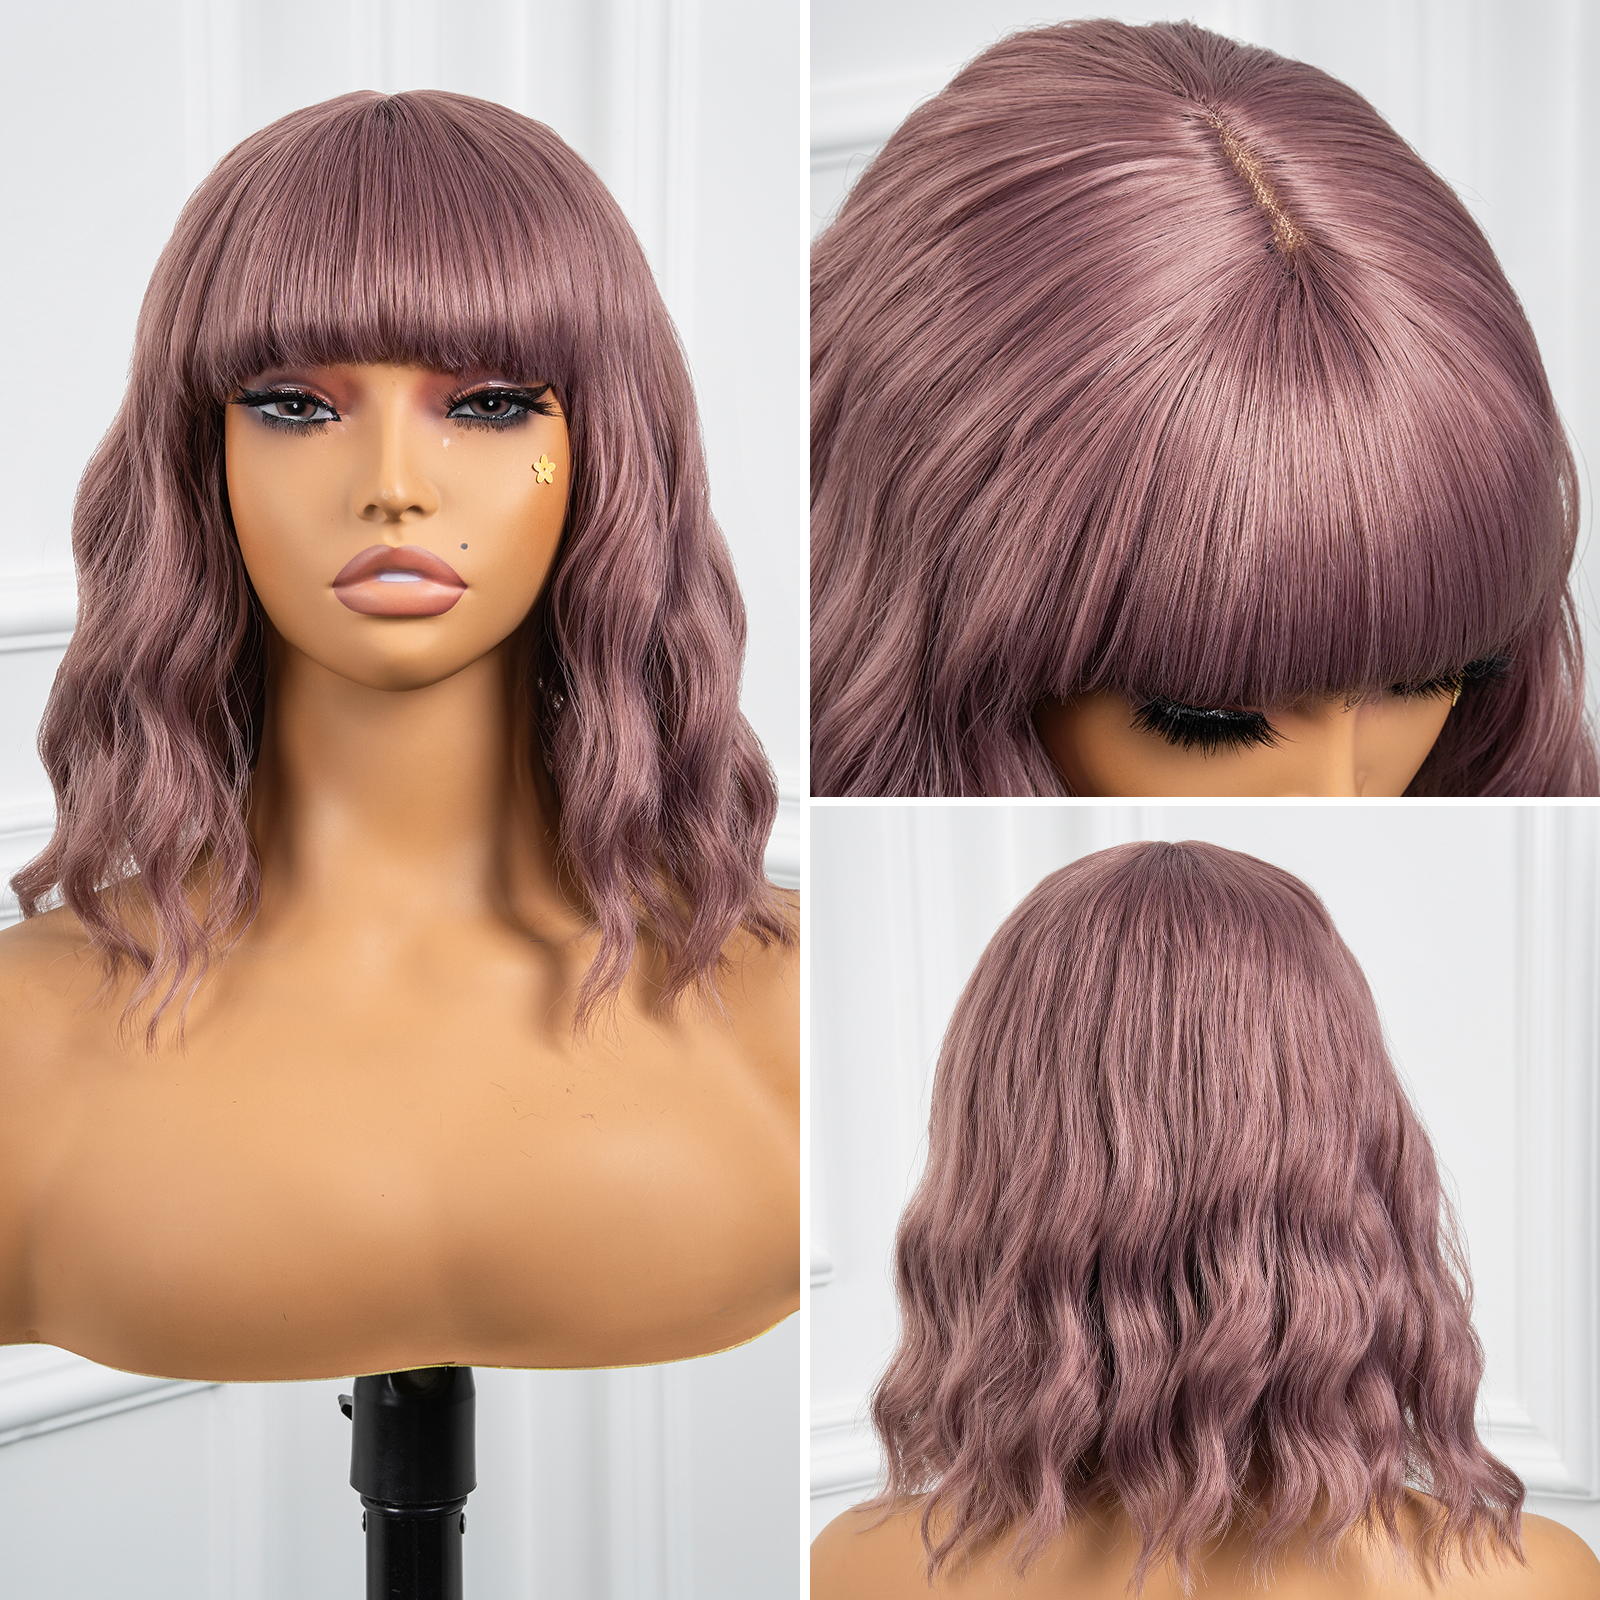 TOYOTRESS Pink Paradise LOOSE WAVY SHORT BOB WIGS HD LACE PART WITH BANGS - 12 INCH NATURAL BLACK BOB HAIR WIGS FOR BLACK WOMEN, SHOULDER LENGTH CURLY SYNTHETIC WIGS (LF0926)